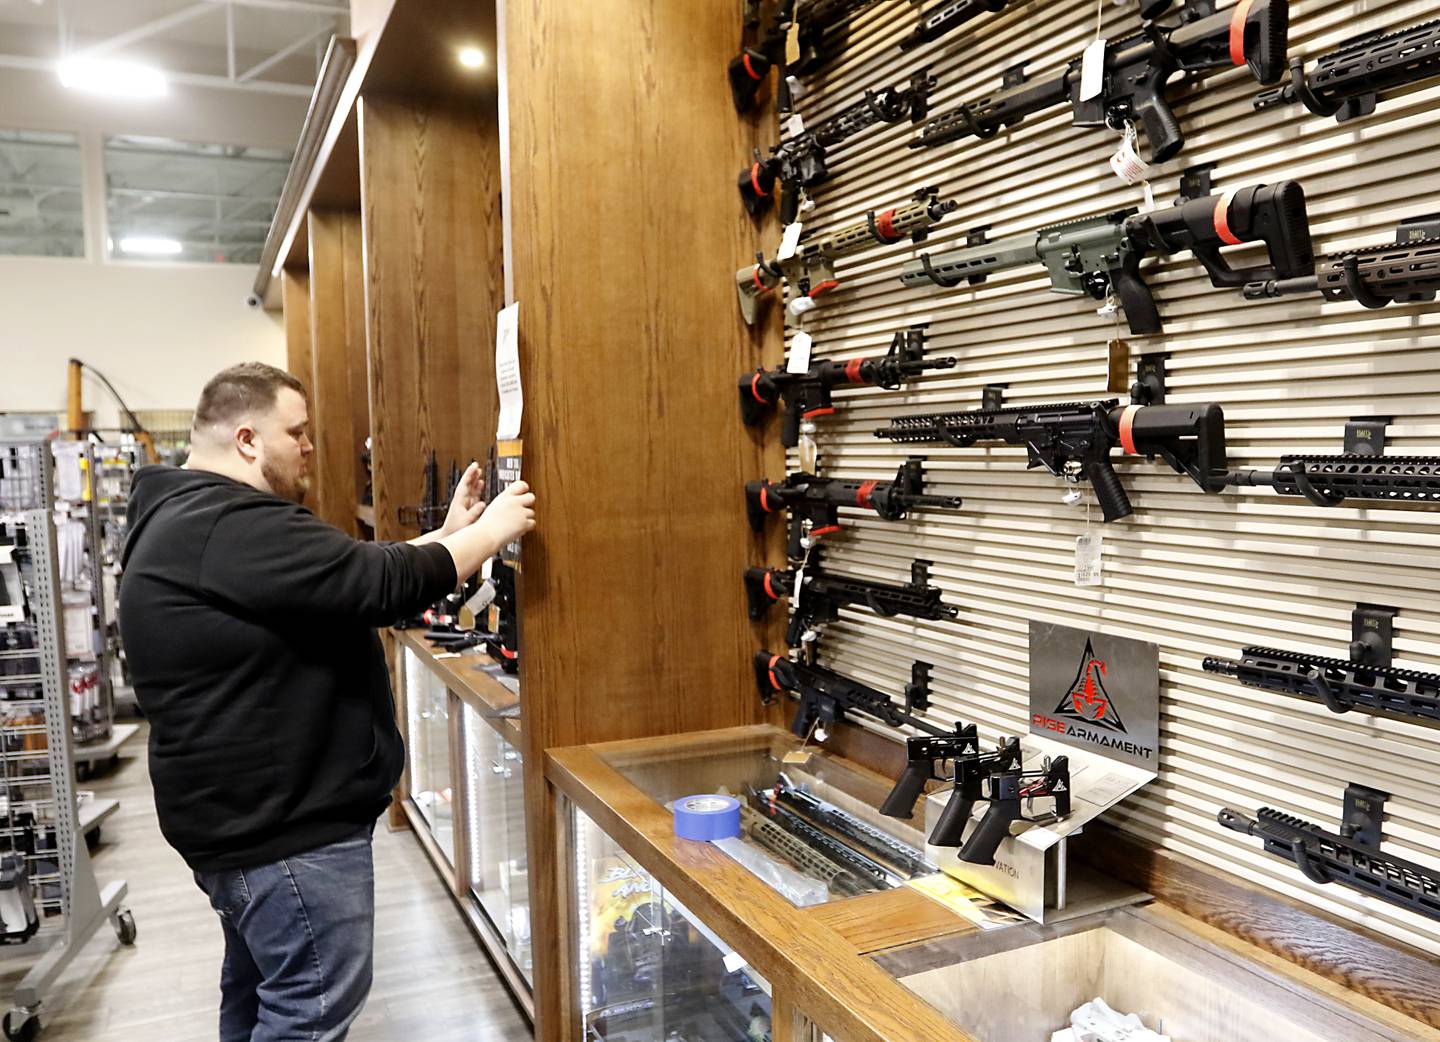 Tyler Duncan, the director of marketing and public relations at Second Amendment Sports, in McHenry, hangs a sign notifying customers that Second Amendment Sports can no longer sell several types of firearms Wednesday Jan. 11, 2023, after a new gun law restricting a number of firearms and attachments and limiting ammunition was signed into law Tuesday night by Gov. JB Pritzker. The bill, along with requiring registration for such guns if already owned and enhancing gun restraining orders, hits at semiautomatic weapons.